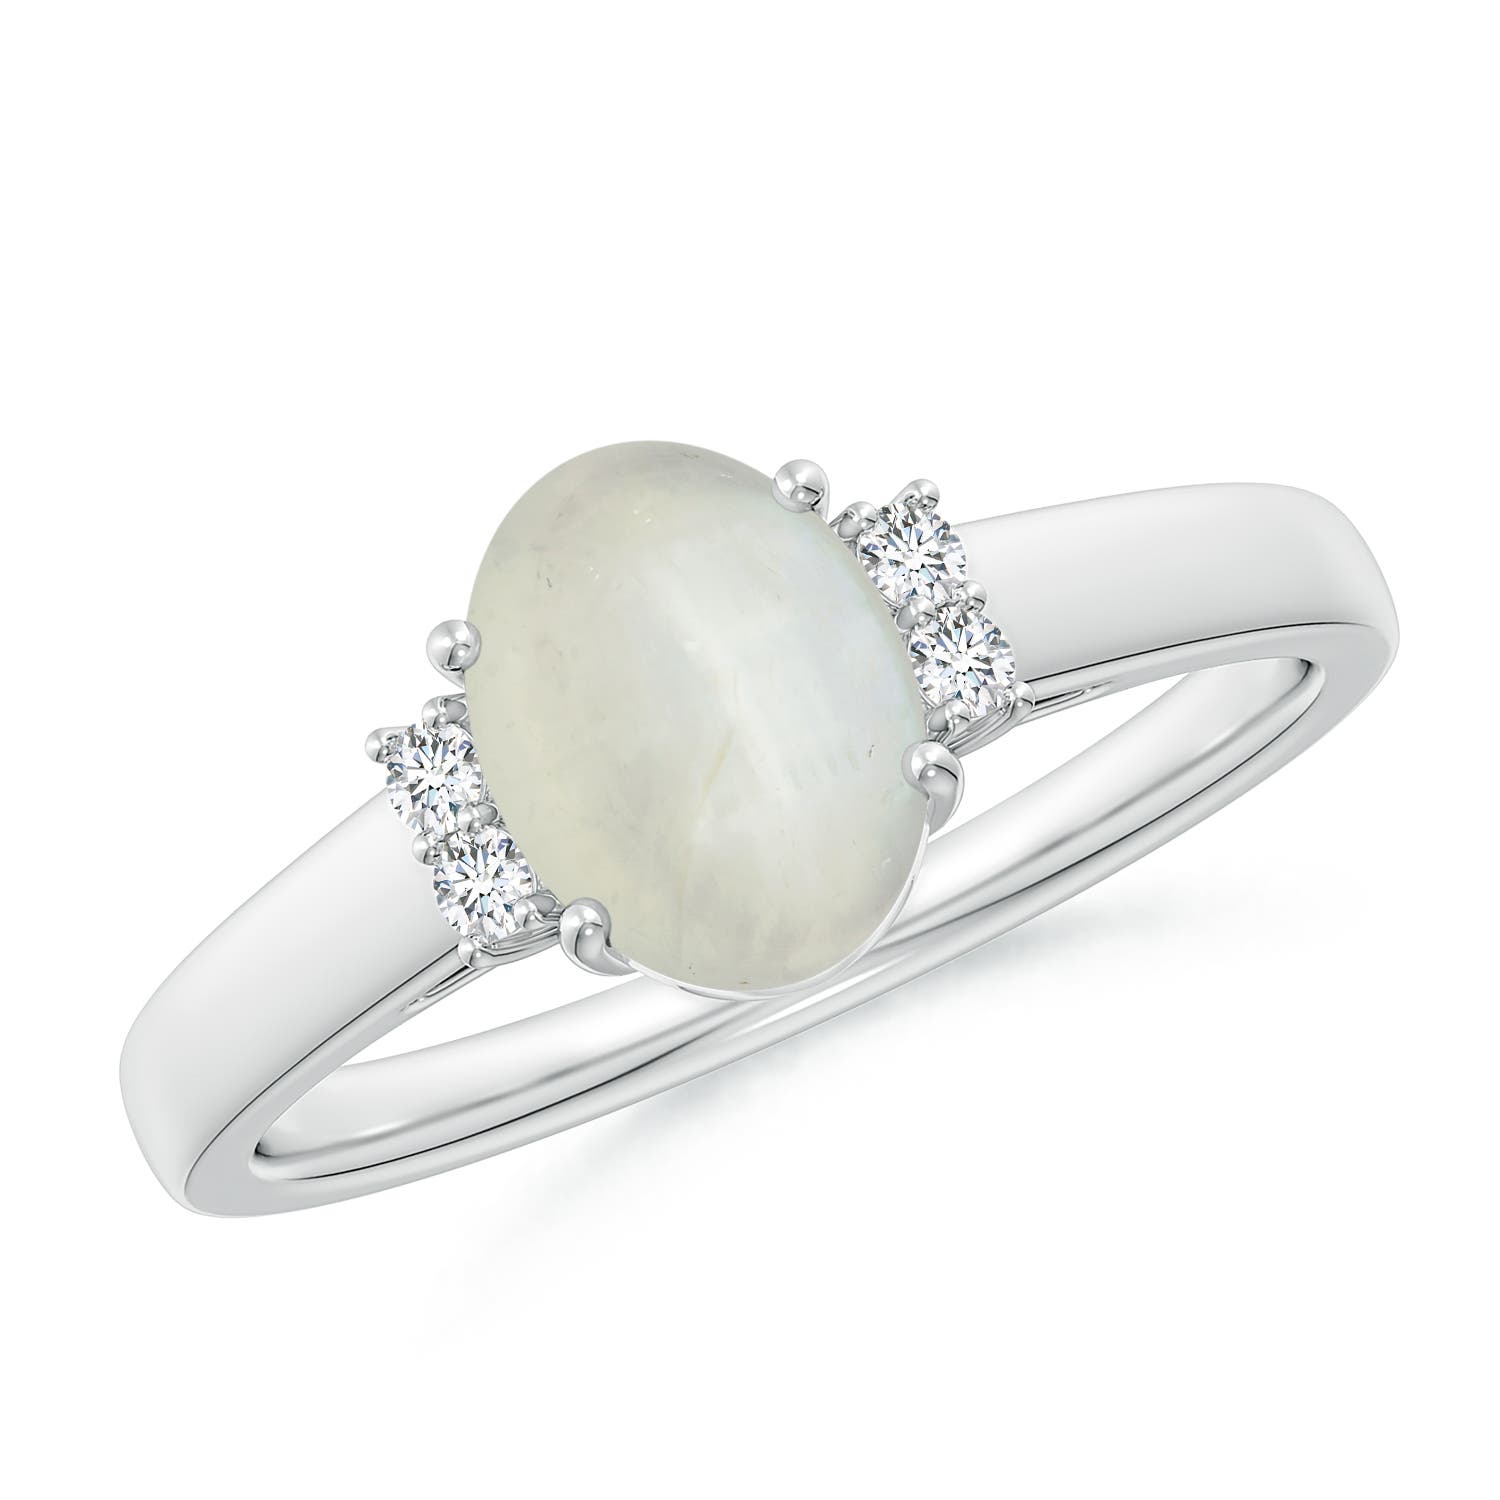 AA - Moonstone / 1.17 CT / 14 KT White Gold